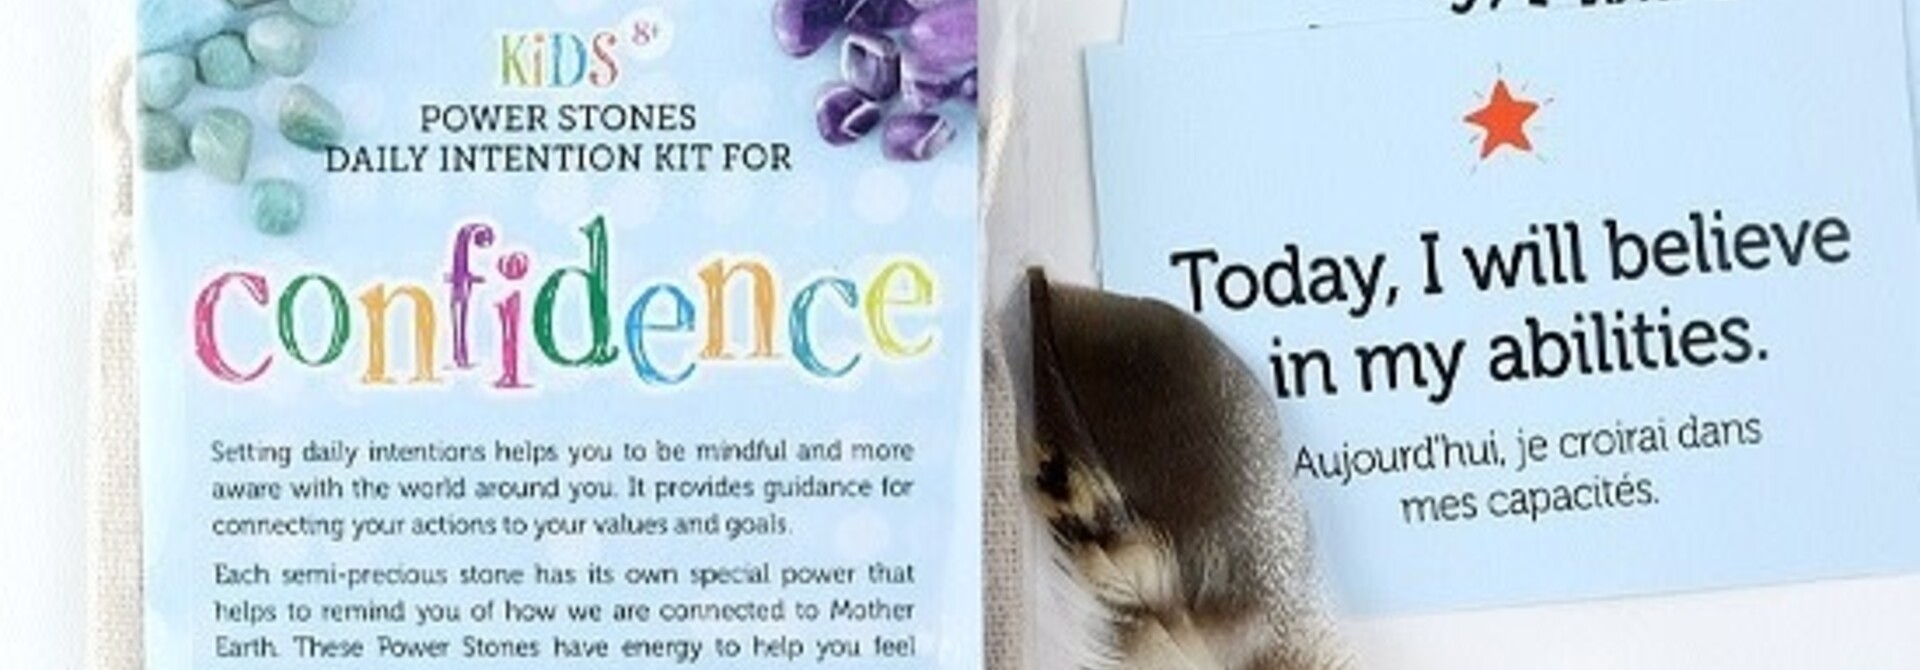 KIDS Power Stones Intention Kit for Confidence